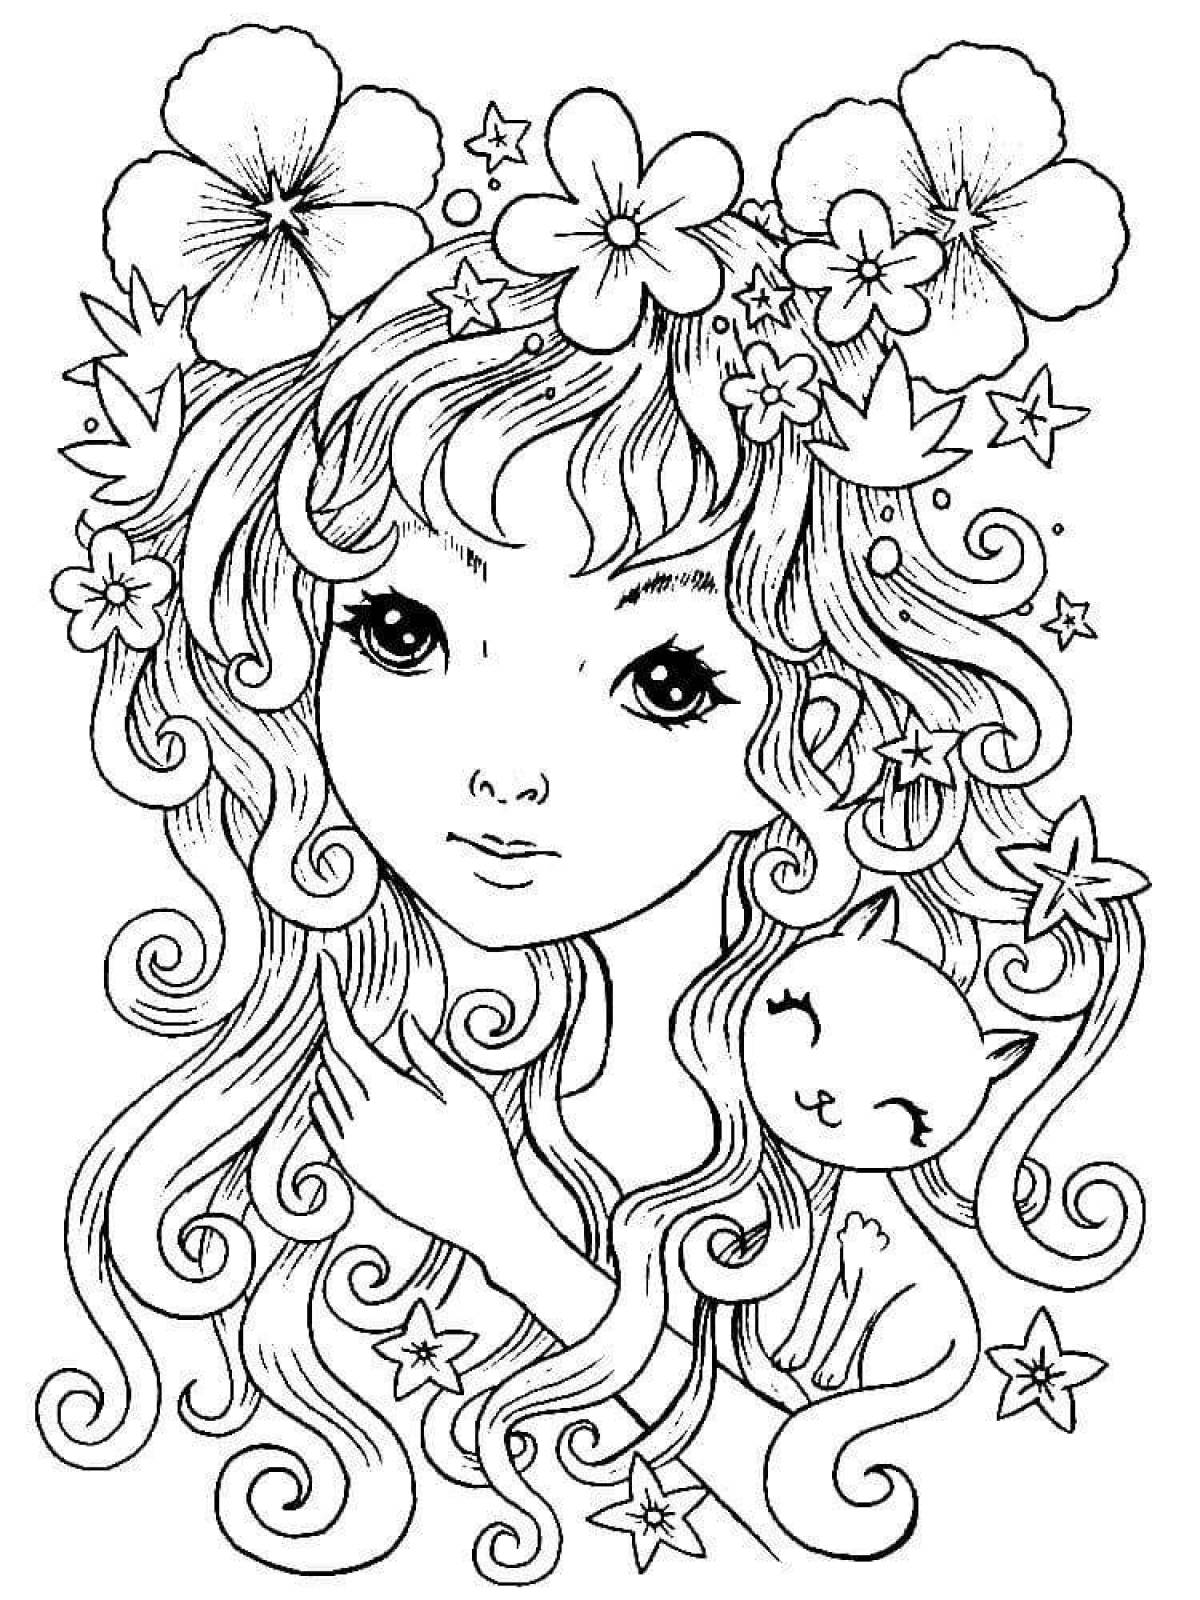 Fun coloring for girls 11-12 years old